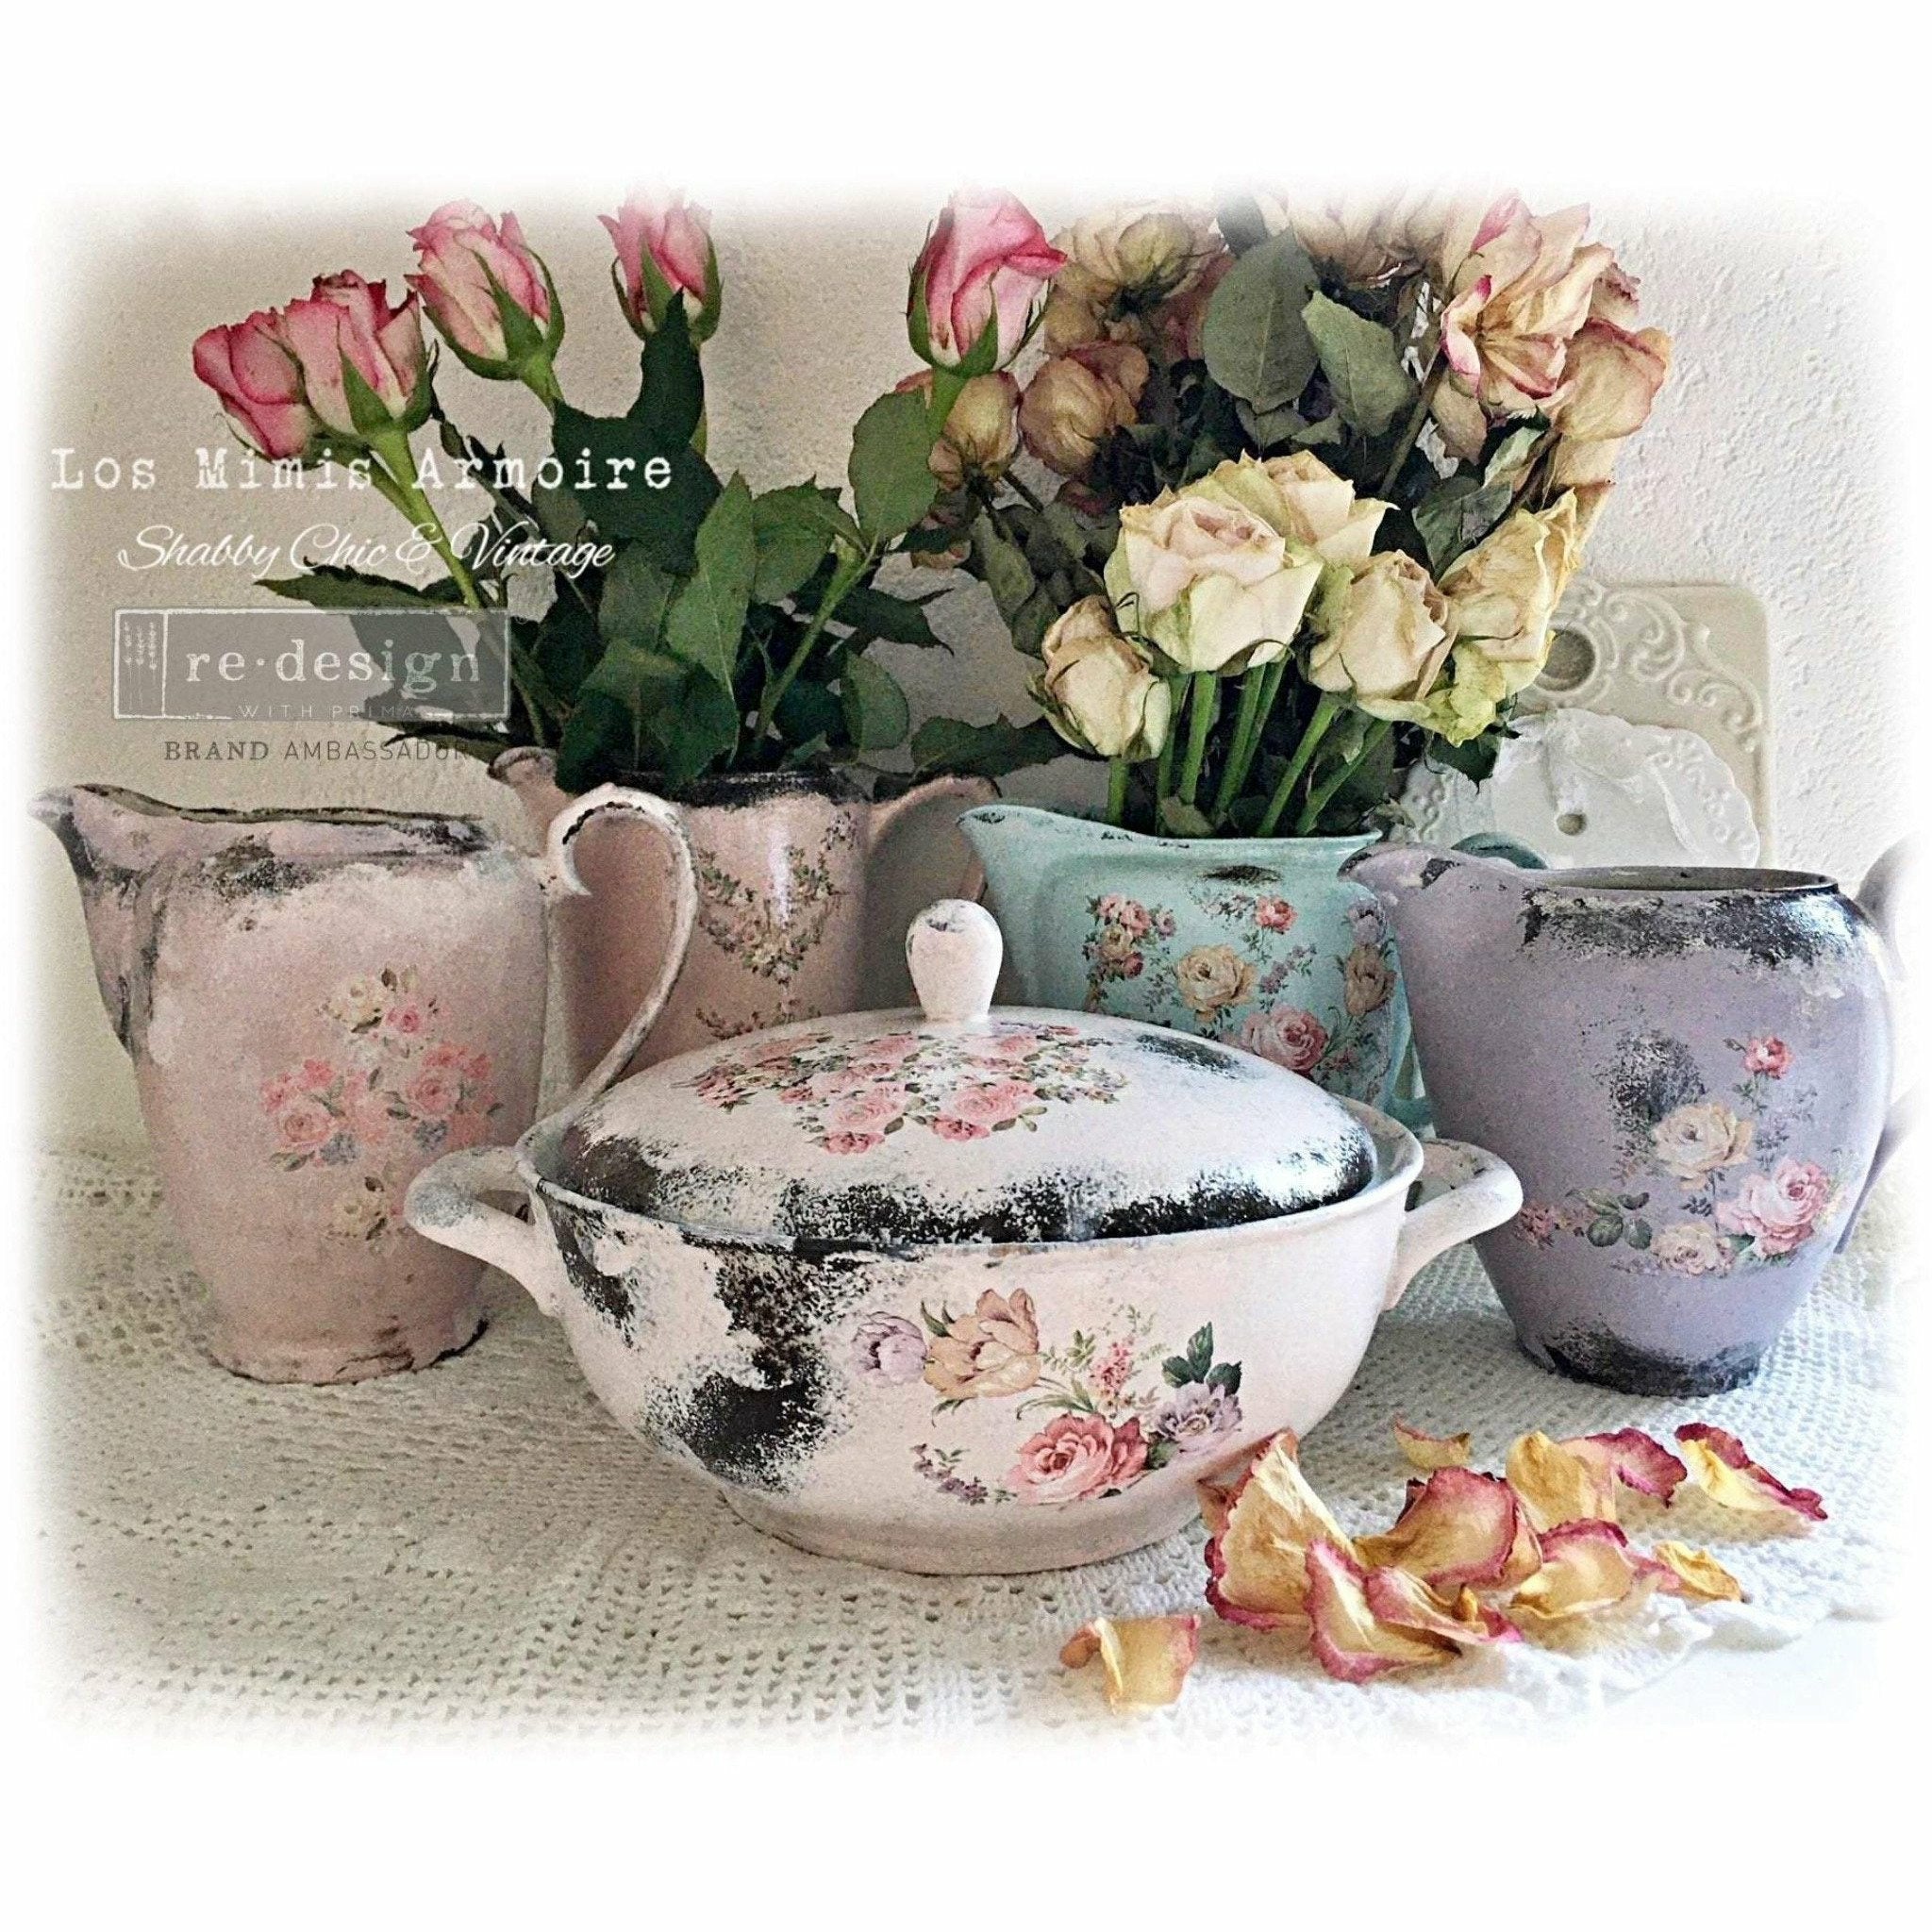 Four vintage cream pitchers and 1 vintage casserole dish with a lid are painted pastel colors and feature ReDesign with Prima's Sweet Spring knob transfers on it.